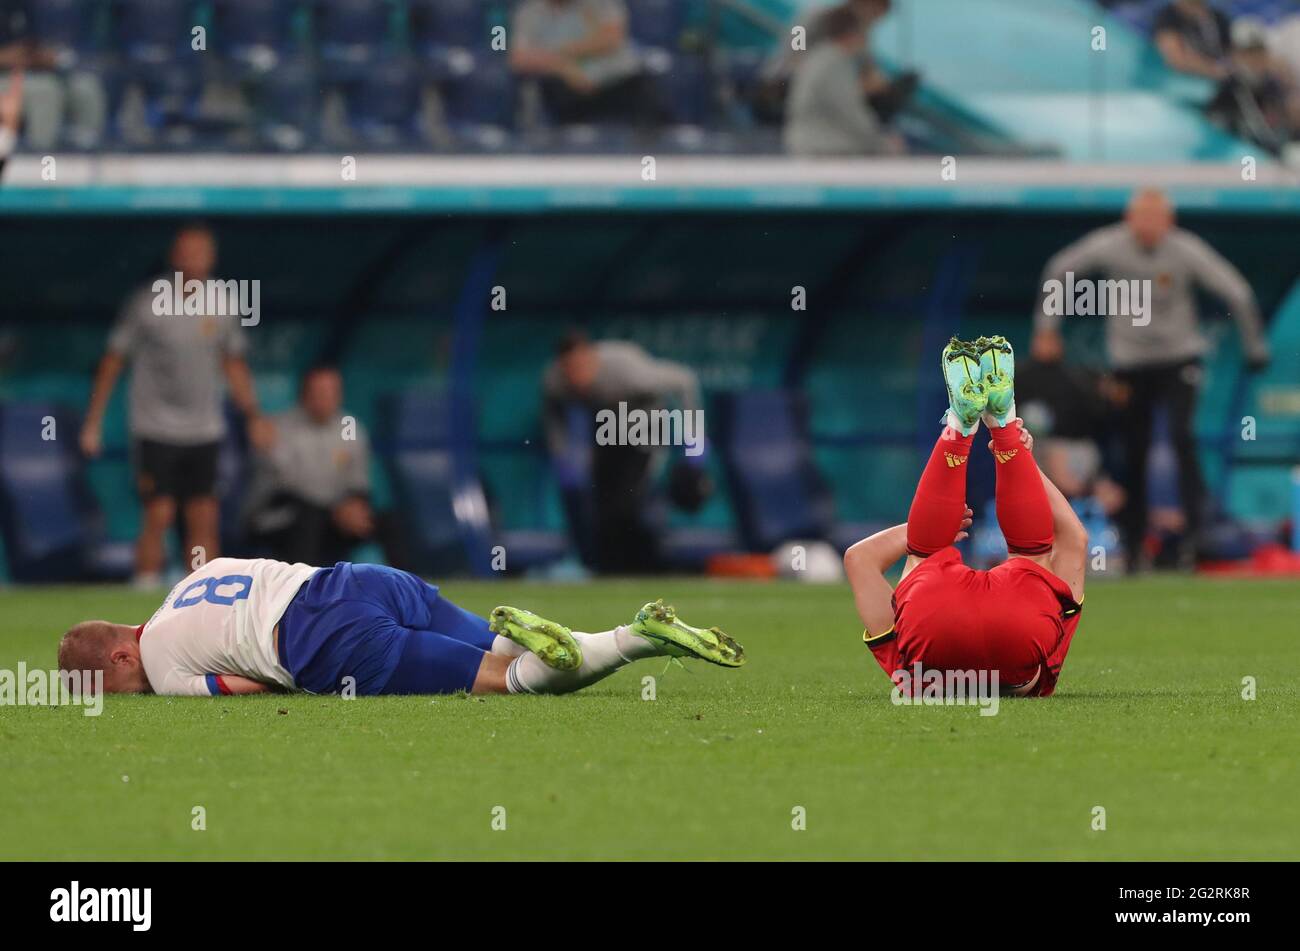 12 June 2021, Russia, St. Petersburg: Football: European Championship, Belgium - Russia, preliminary round, Group B, Matchday 1 at St. Petersburg Stadium. Dmitri Barinov (Russia) and Dries Mertens (Belgium, r) lie on the turf after a collision. Important: For editorial news reporting purposes only. Not used for commercial or marketing purposes without prior written approval of UEFA. Images must appear as still images and must not emulate match action video footage. Photographs published in online publications (whether via the Internet or otherwise) shall have an interval of at least 20 seconds Stock Photo